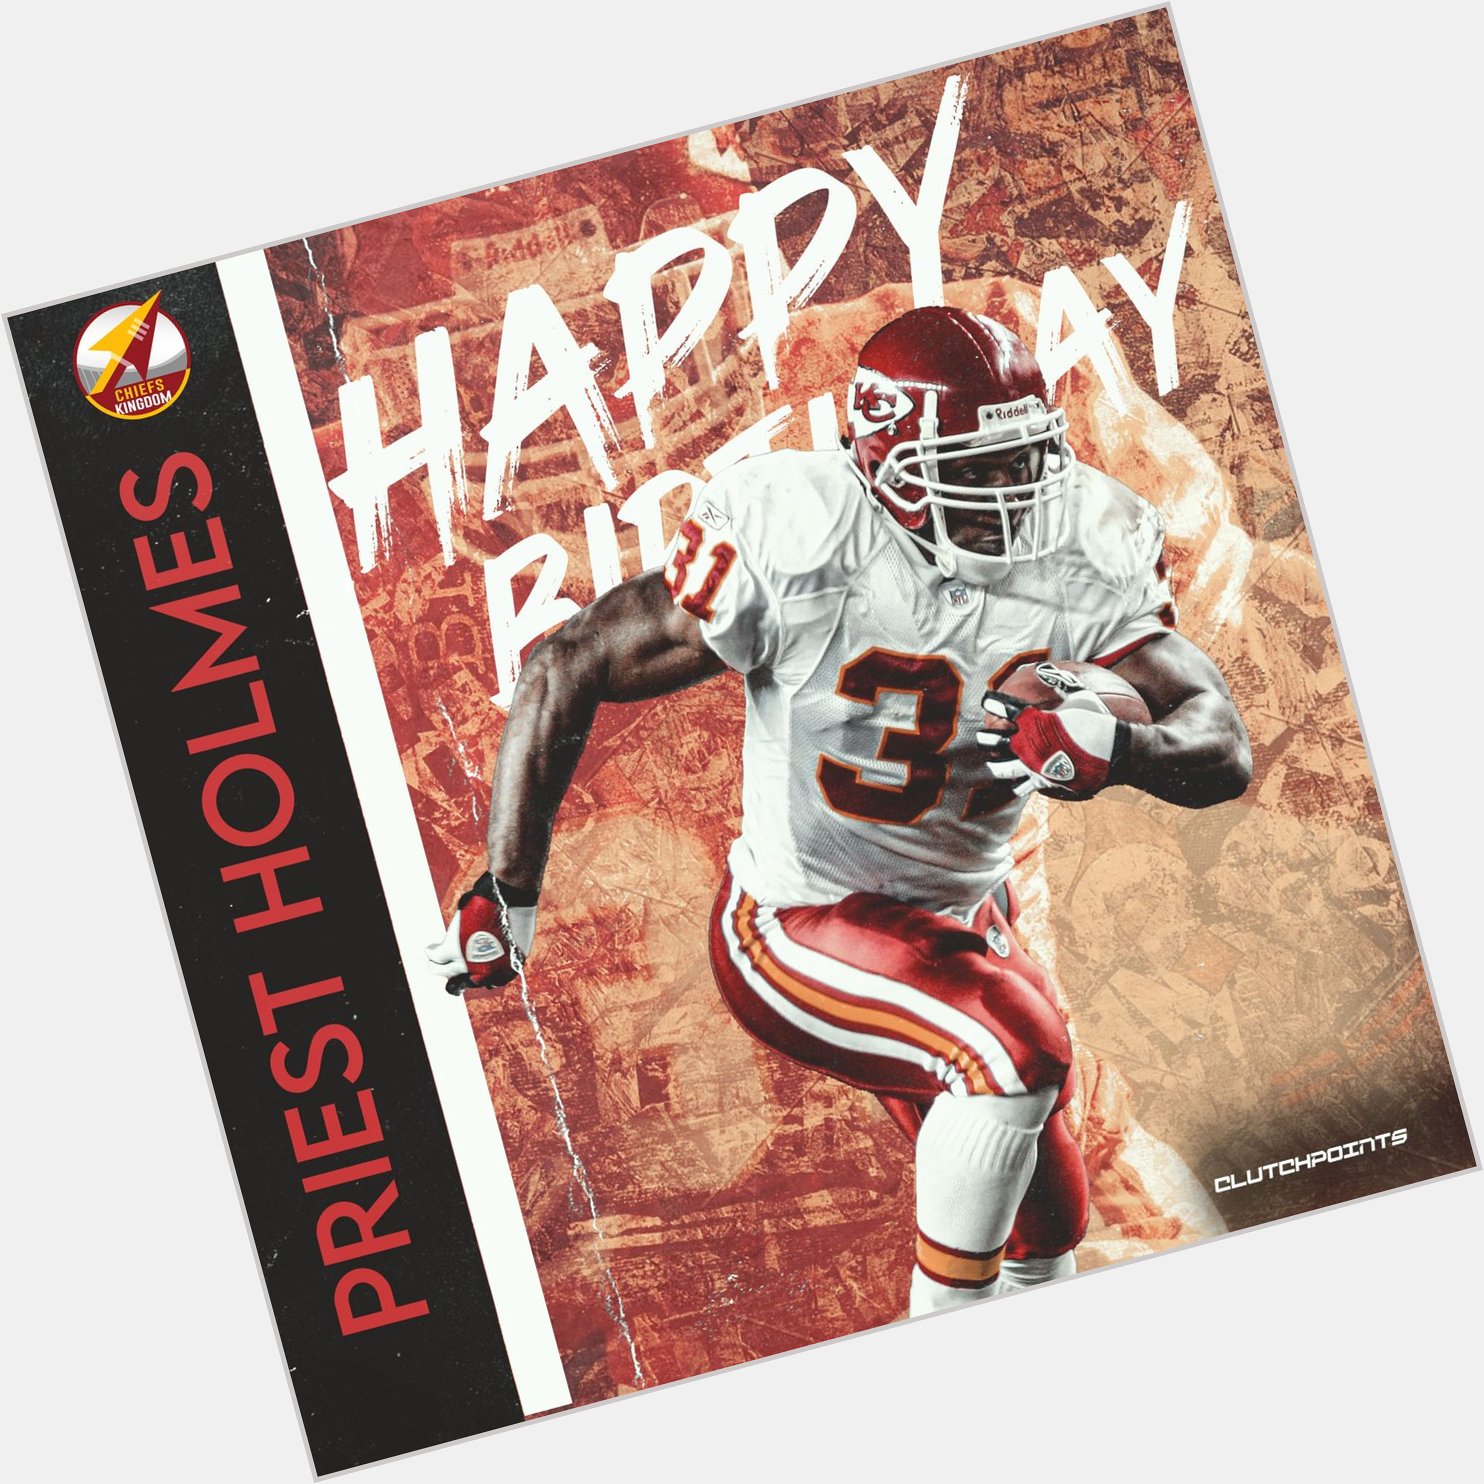 Join Chiefs Nation in greeting Priest Holmes a happy 48th birthday!  